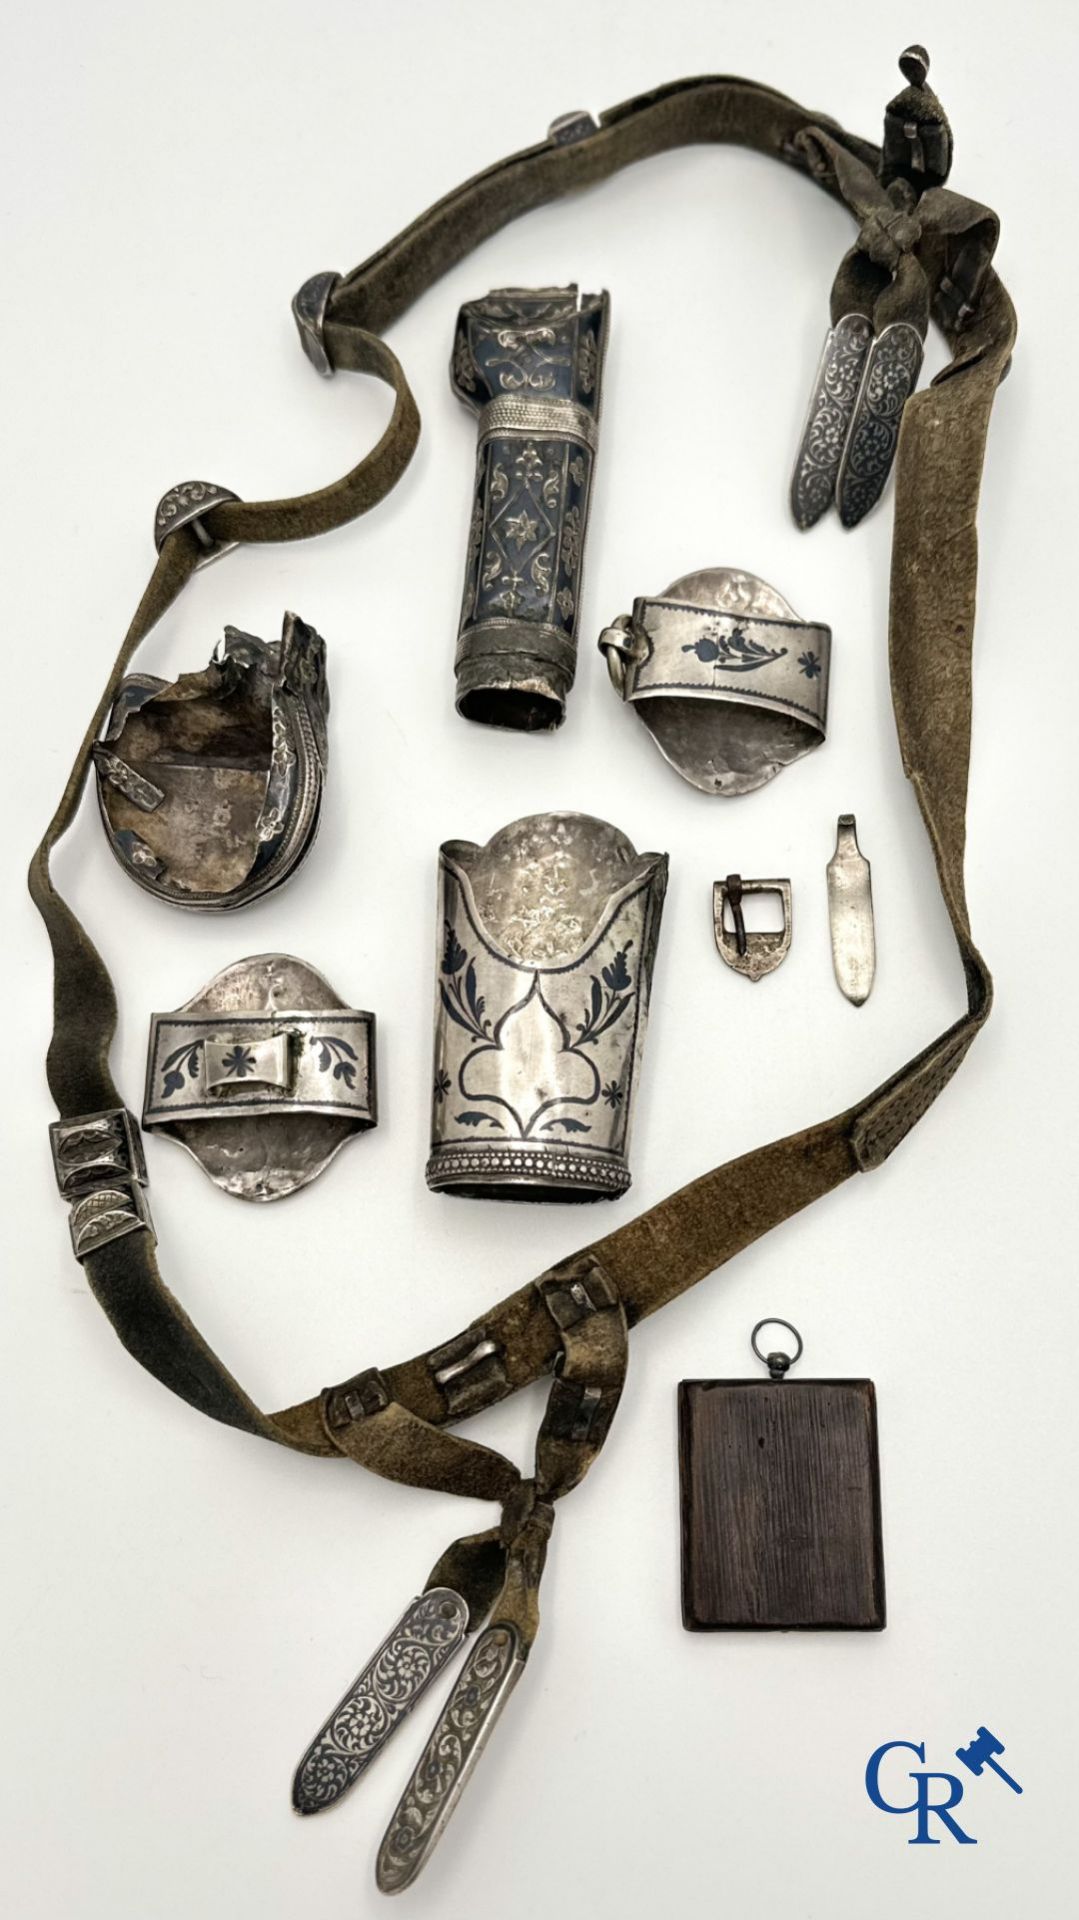 Jewellery-silver: Russian work: Caucasian belt in silver and pendant with icon in silver. - Image 2 of 3